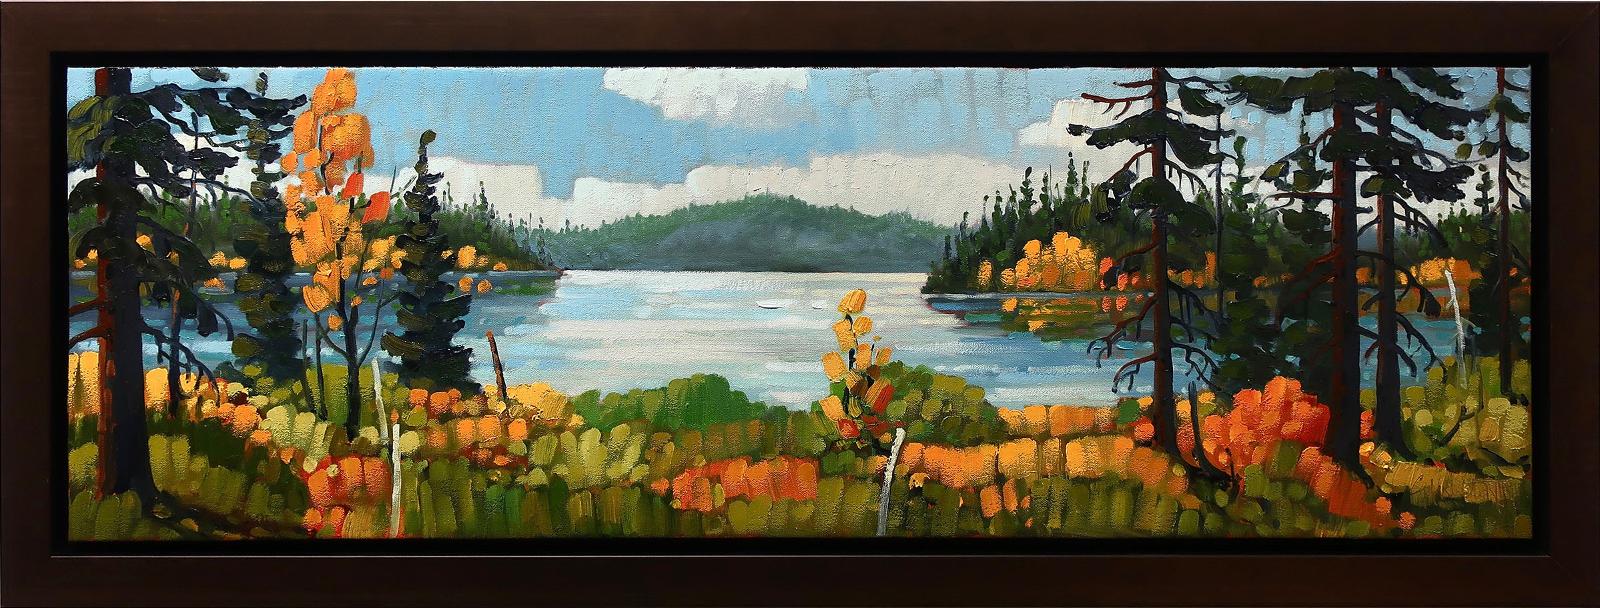 Rod Charlesworth (1955) - Tranquil Waters, Northern Ontario